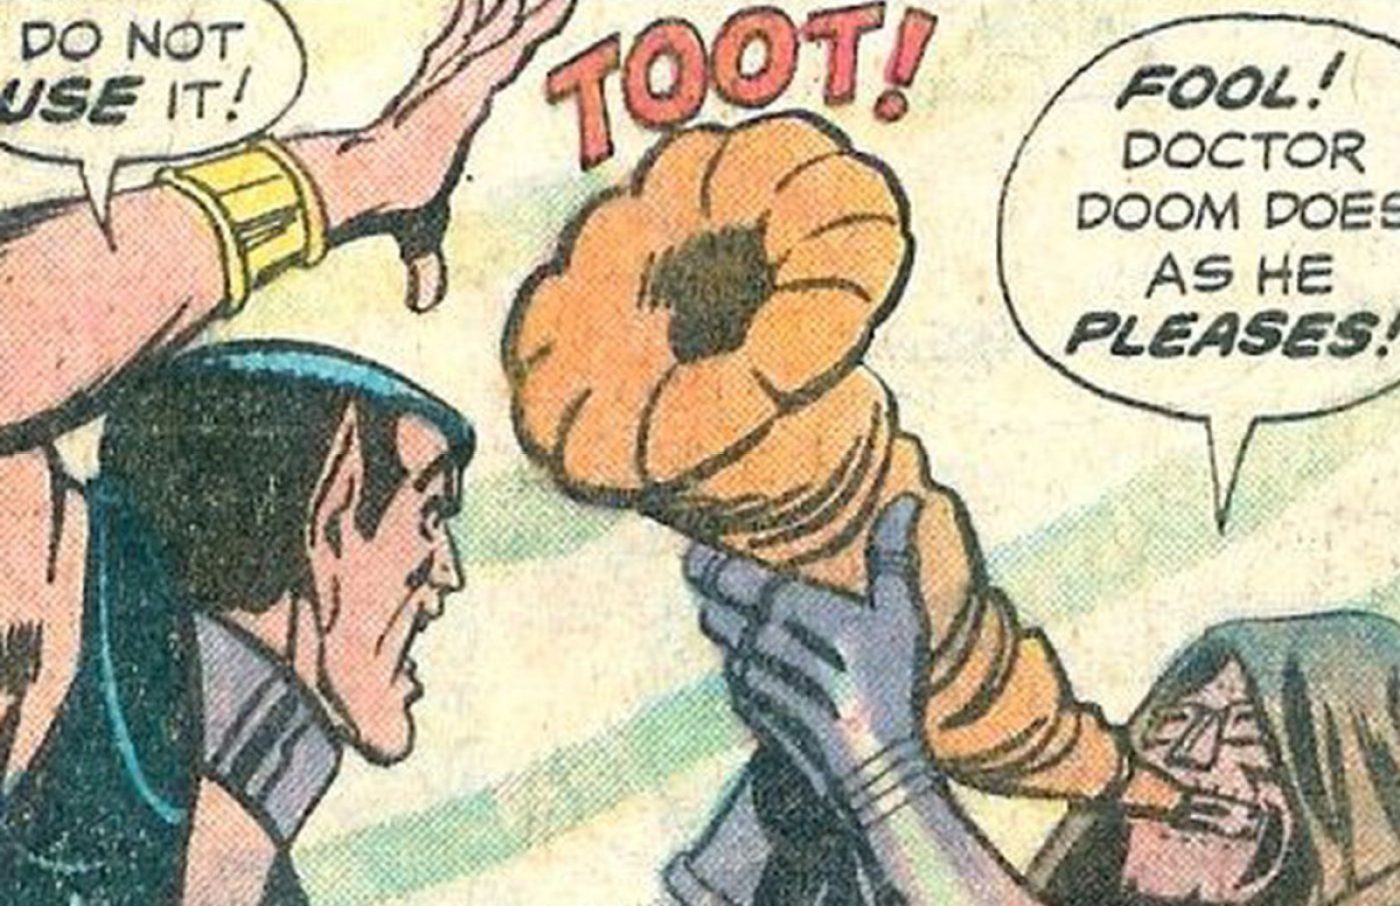 Panel from Marvel comics. Namor says, "Do not use it!" and Doom replies, "Fool! Doctor Doom does as he pleases!" Doom blows a horn that says, "Toot!"